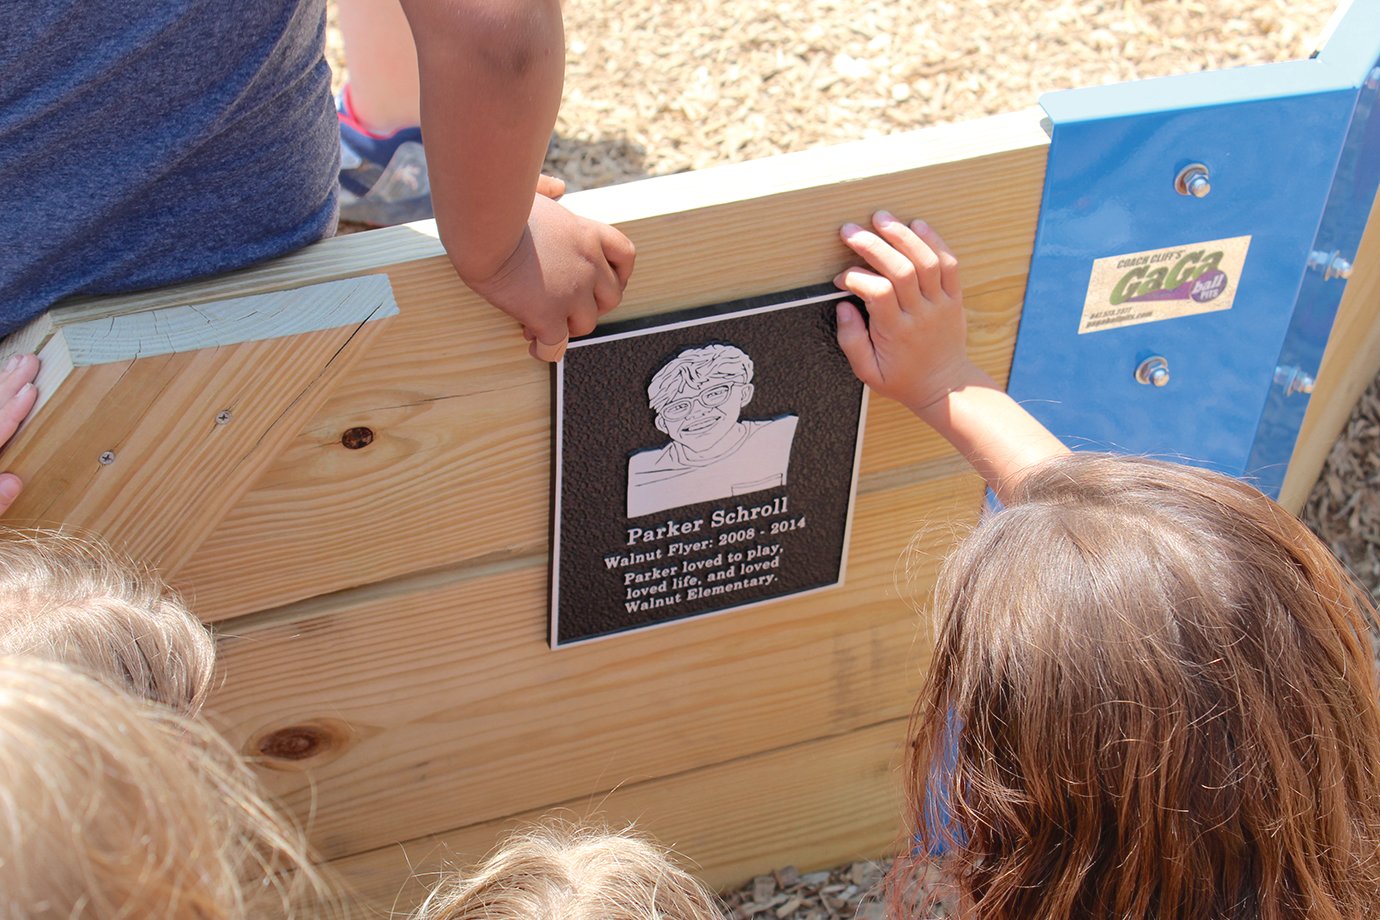 A plaque commemorating Parker Schroll adorns the newly installed Gaga Pit at Walnut Elementary.